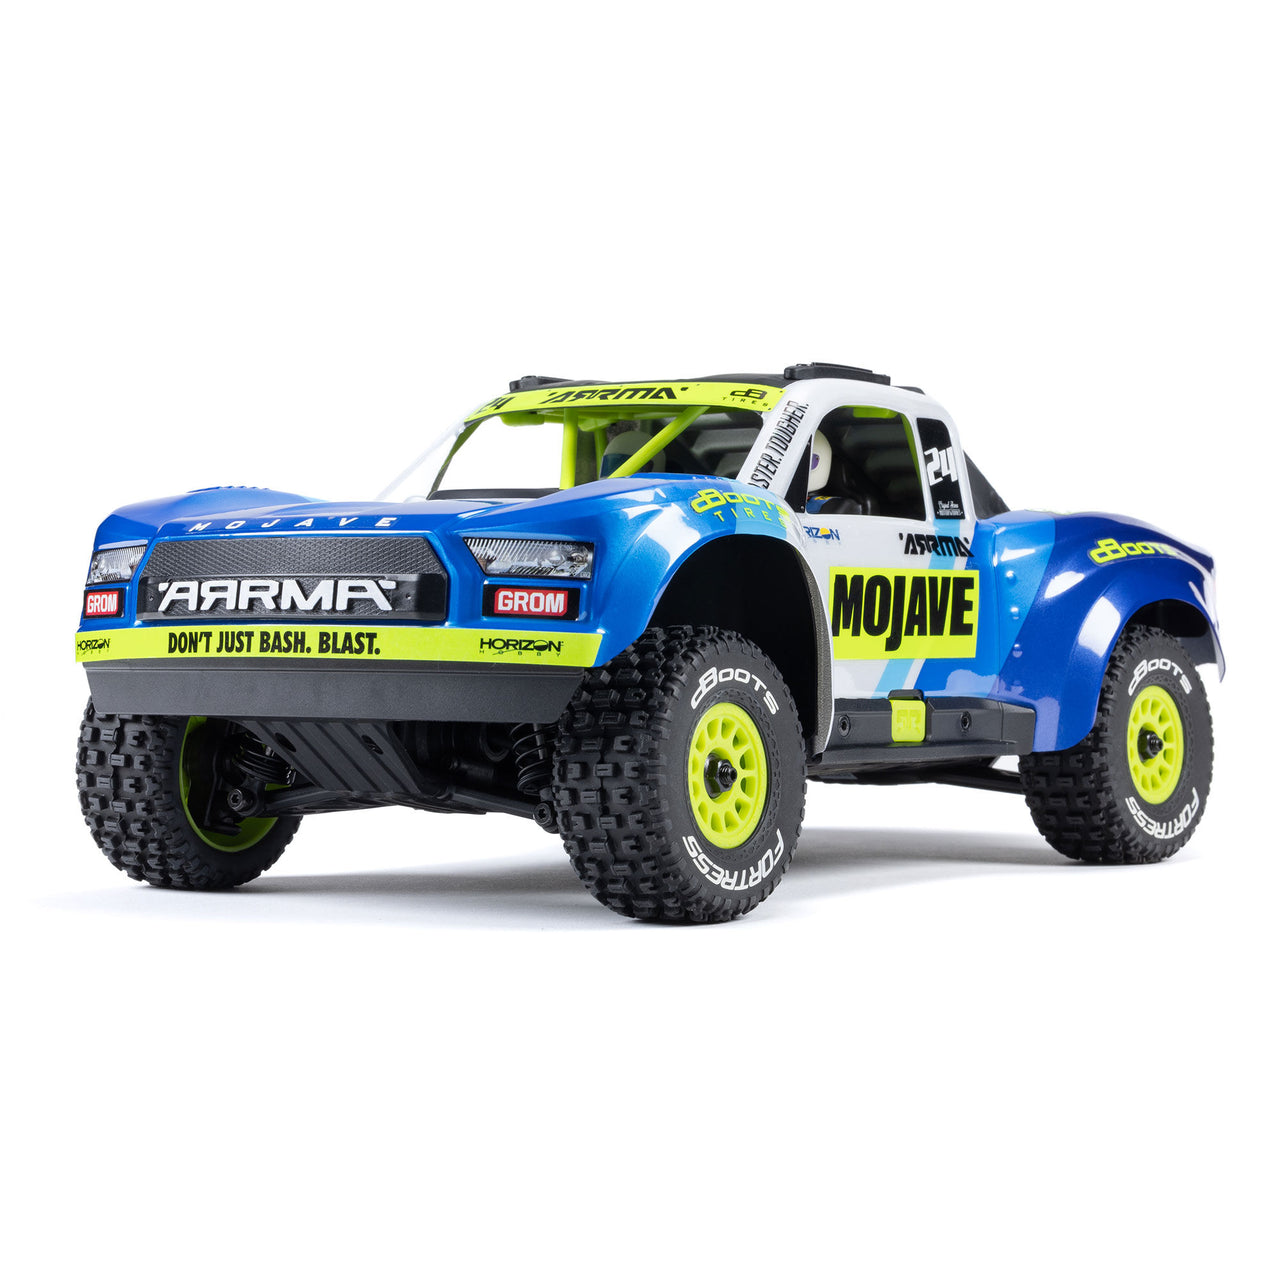 ARA2104T2 MOJAVE GROM MEGA 380 Brushed 4X4 Small Scale Desert Truck RTR with Battery & Charger, Blue/White